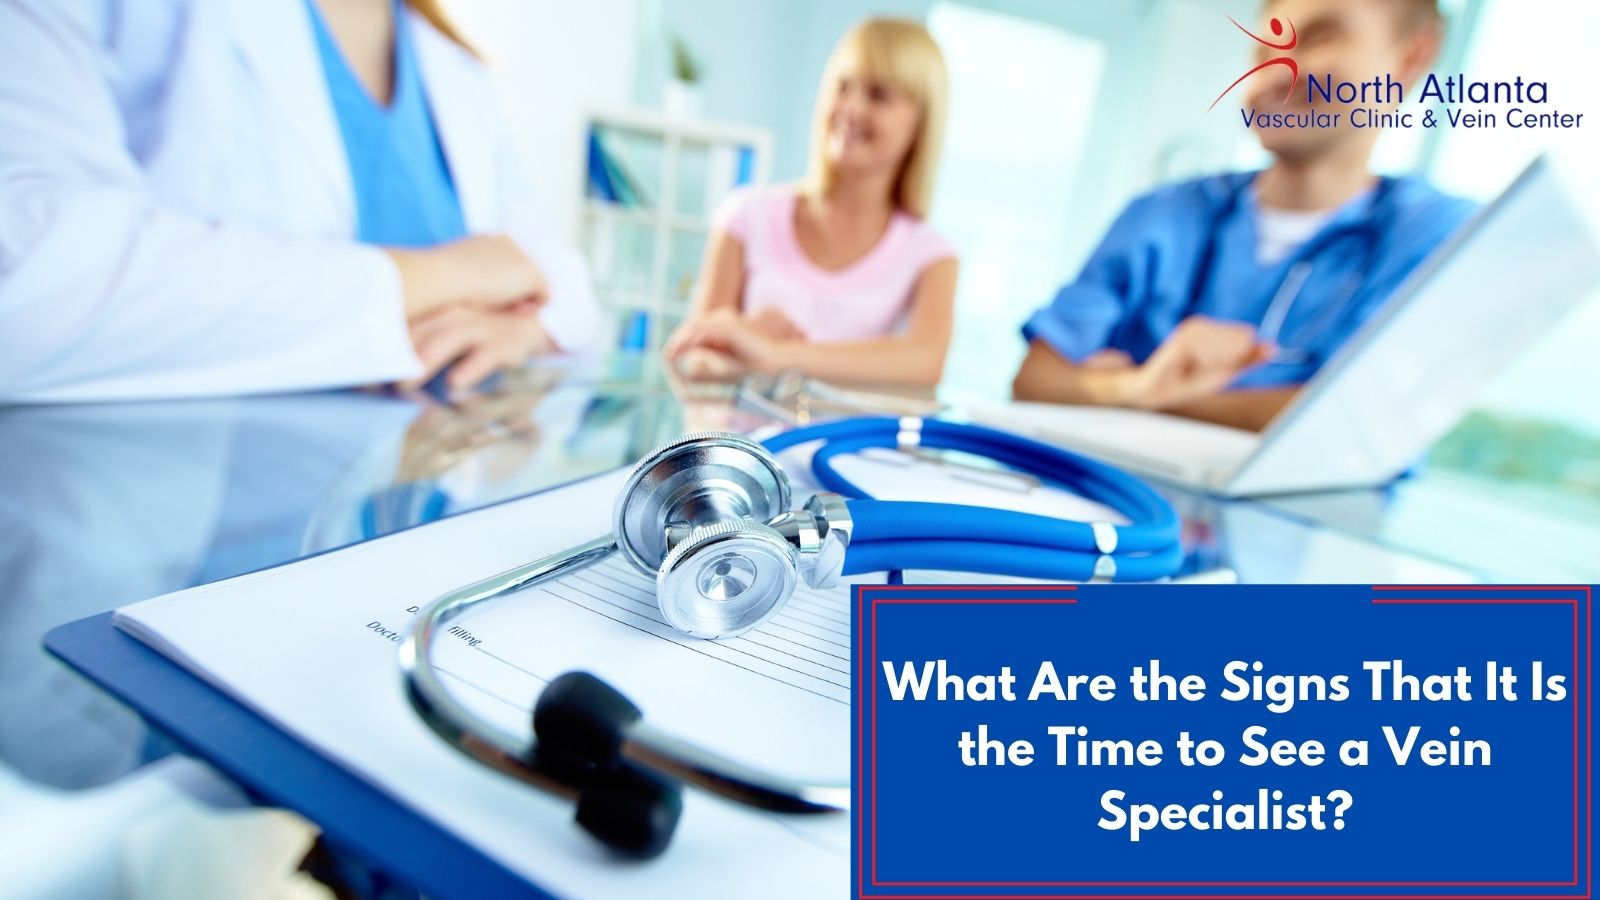 What Are the Signs That It Is the Time to See a Vein Specialist?